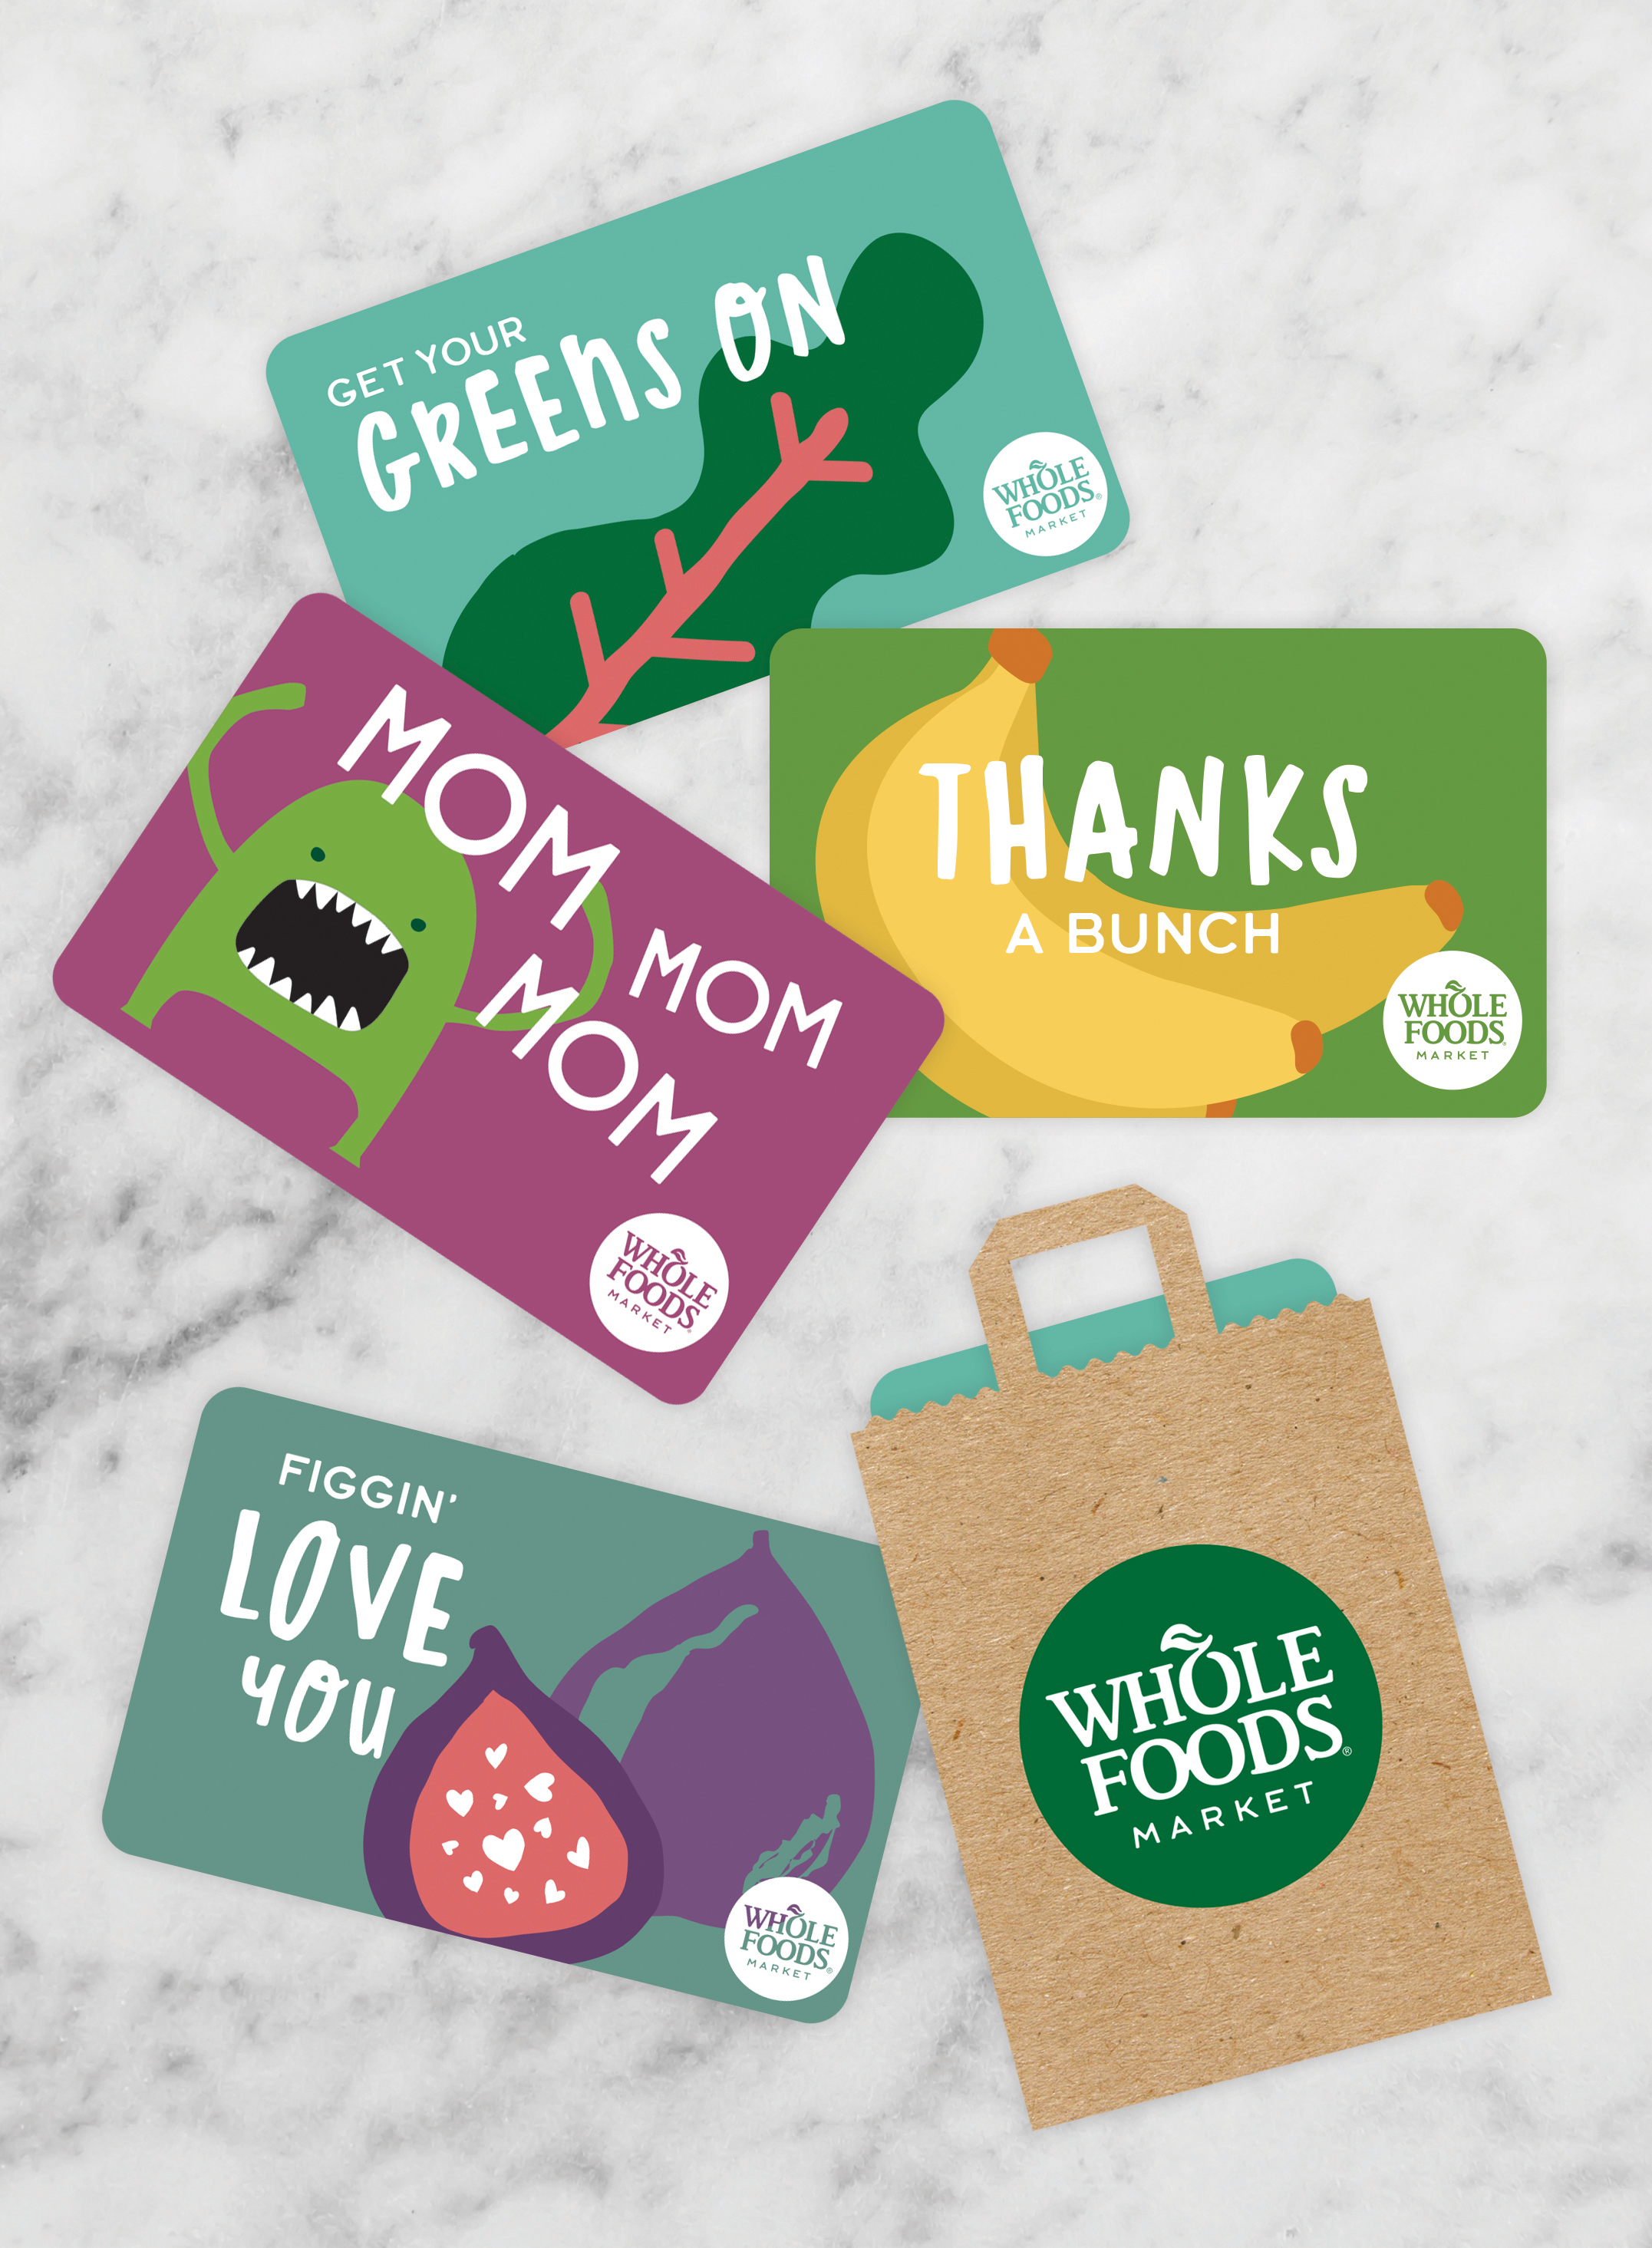 Whole Foods Gift Card by Steve Wolf on Dribbble